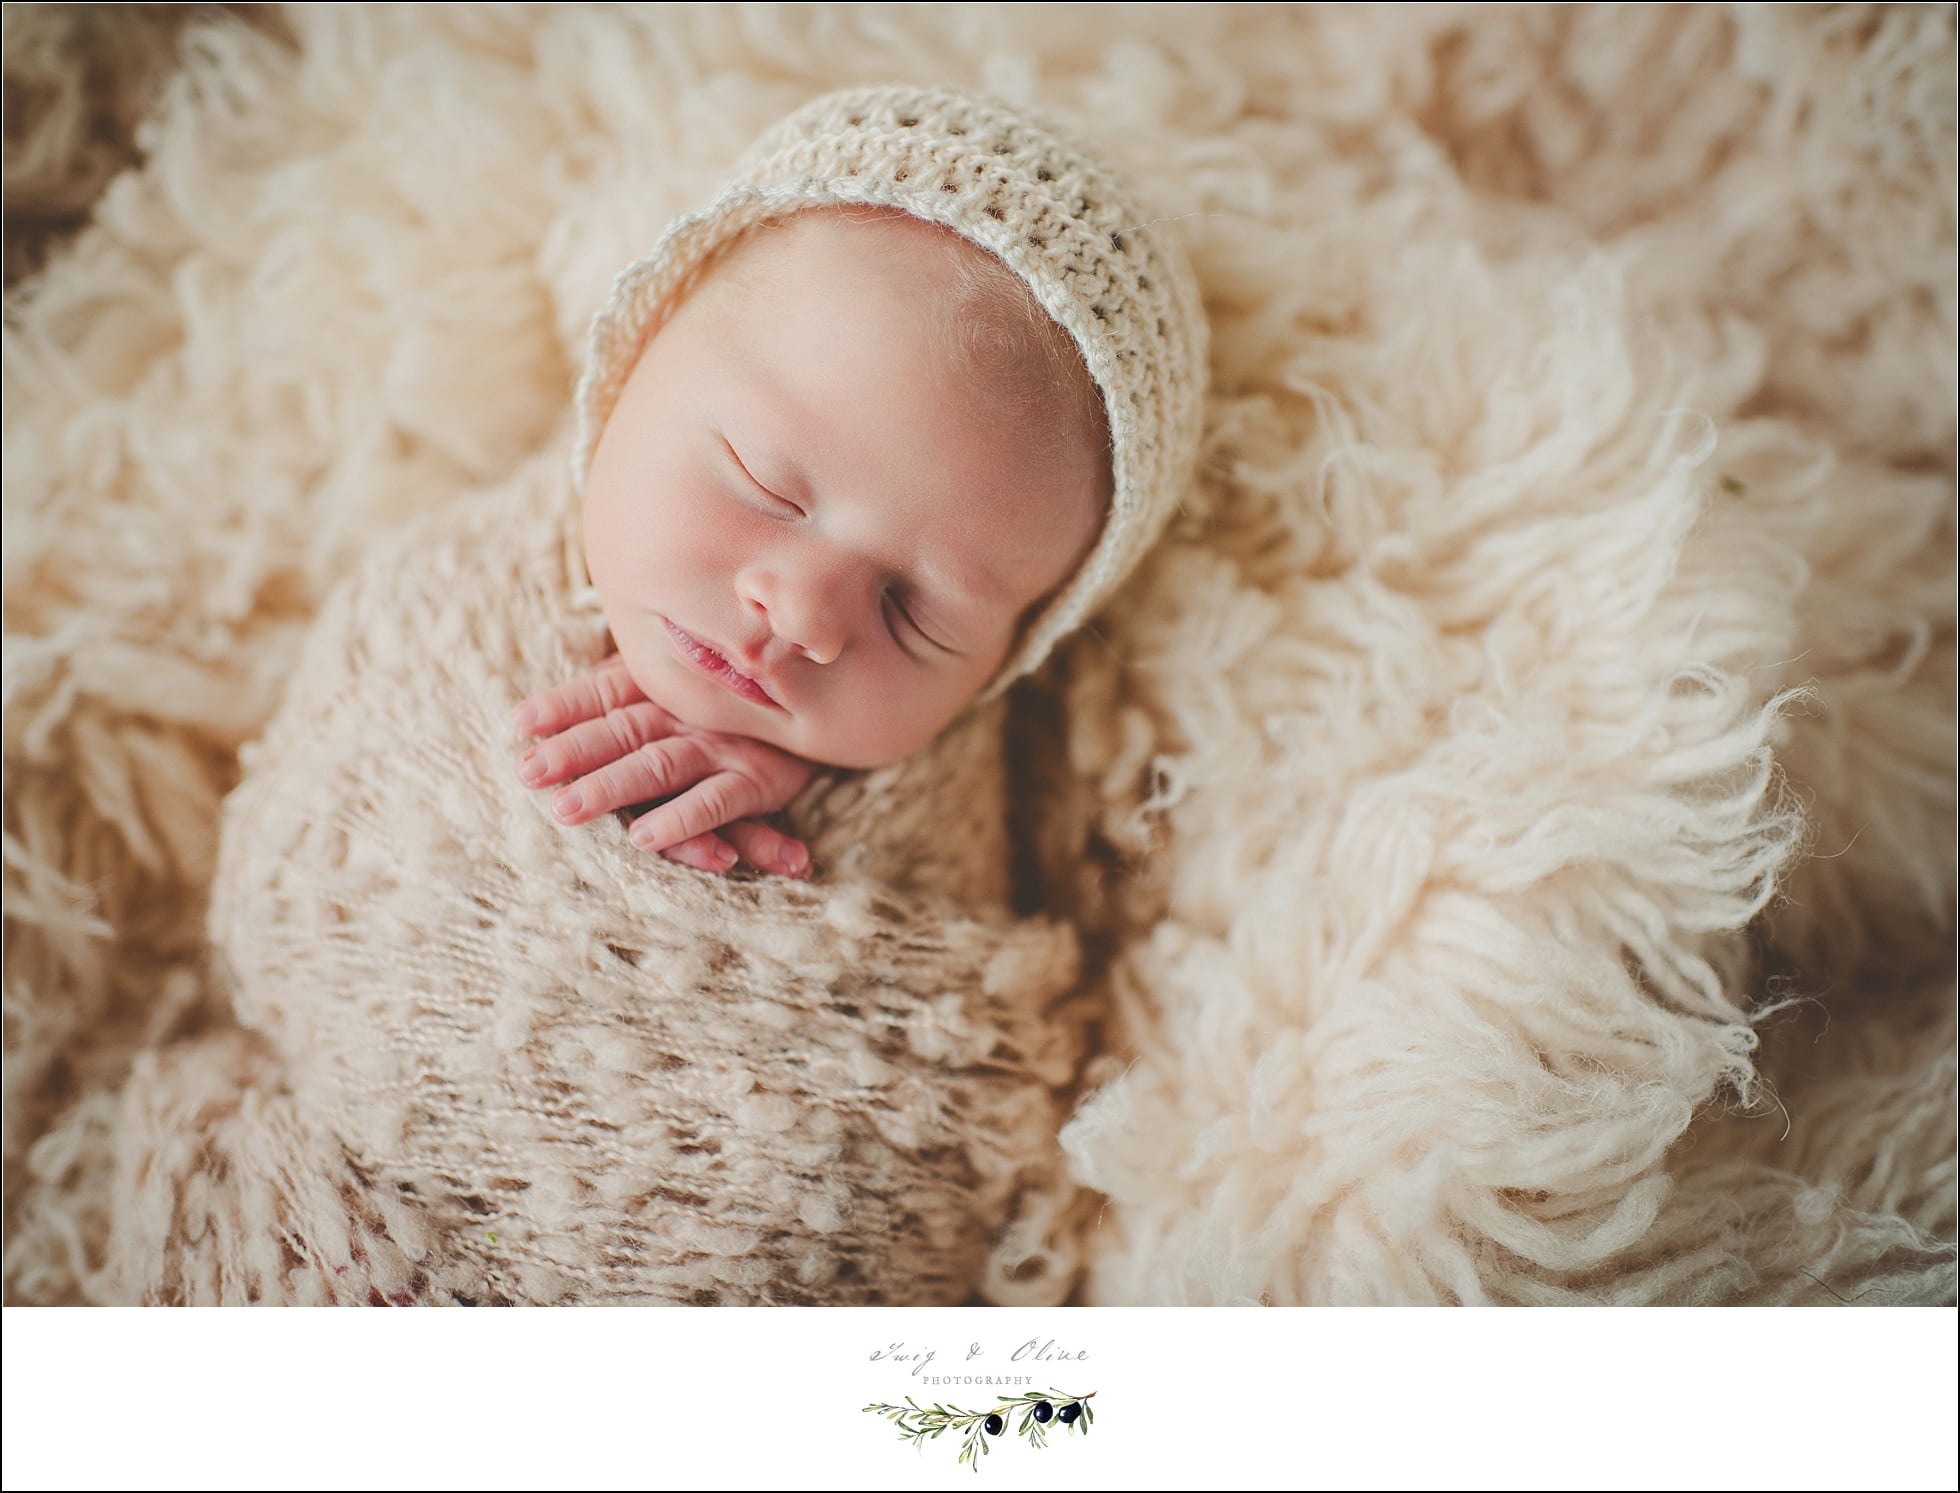 bonnets, blankets, wraps, hair flowers, head bands, soft light, babies, newborns, angels, miracles, Twig and Olive Photography